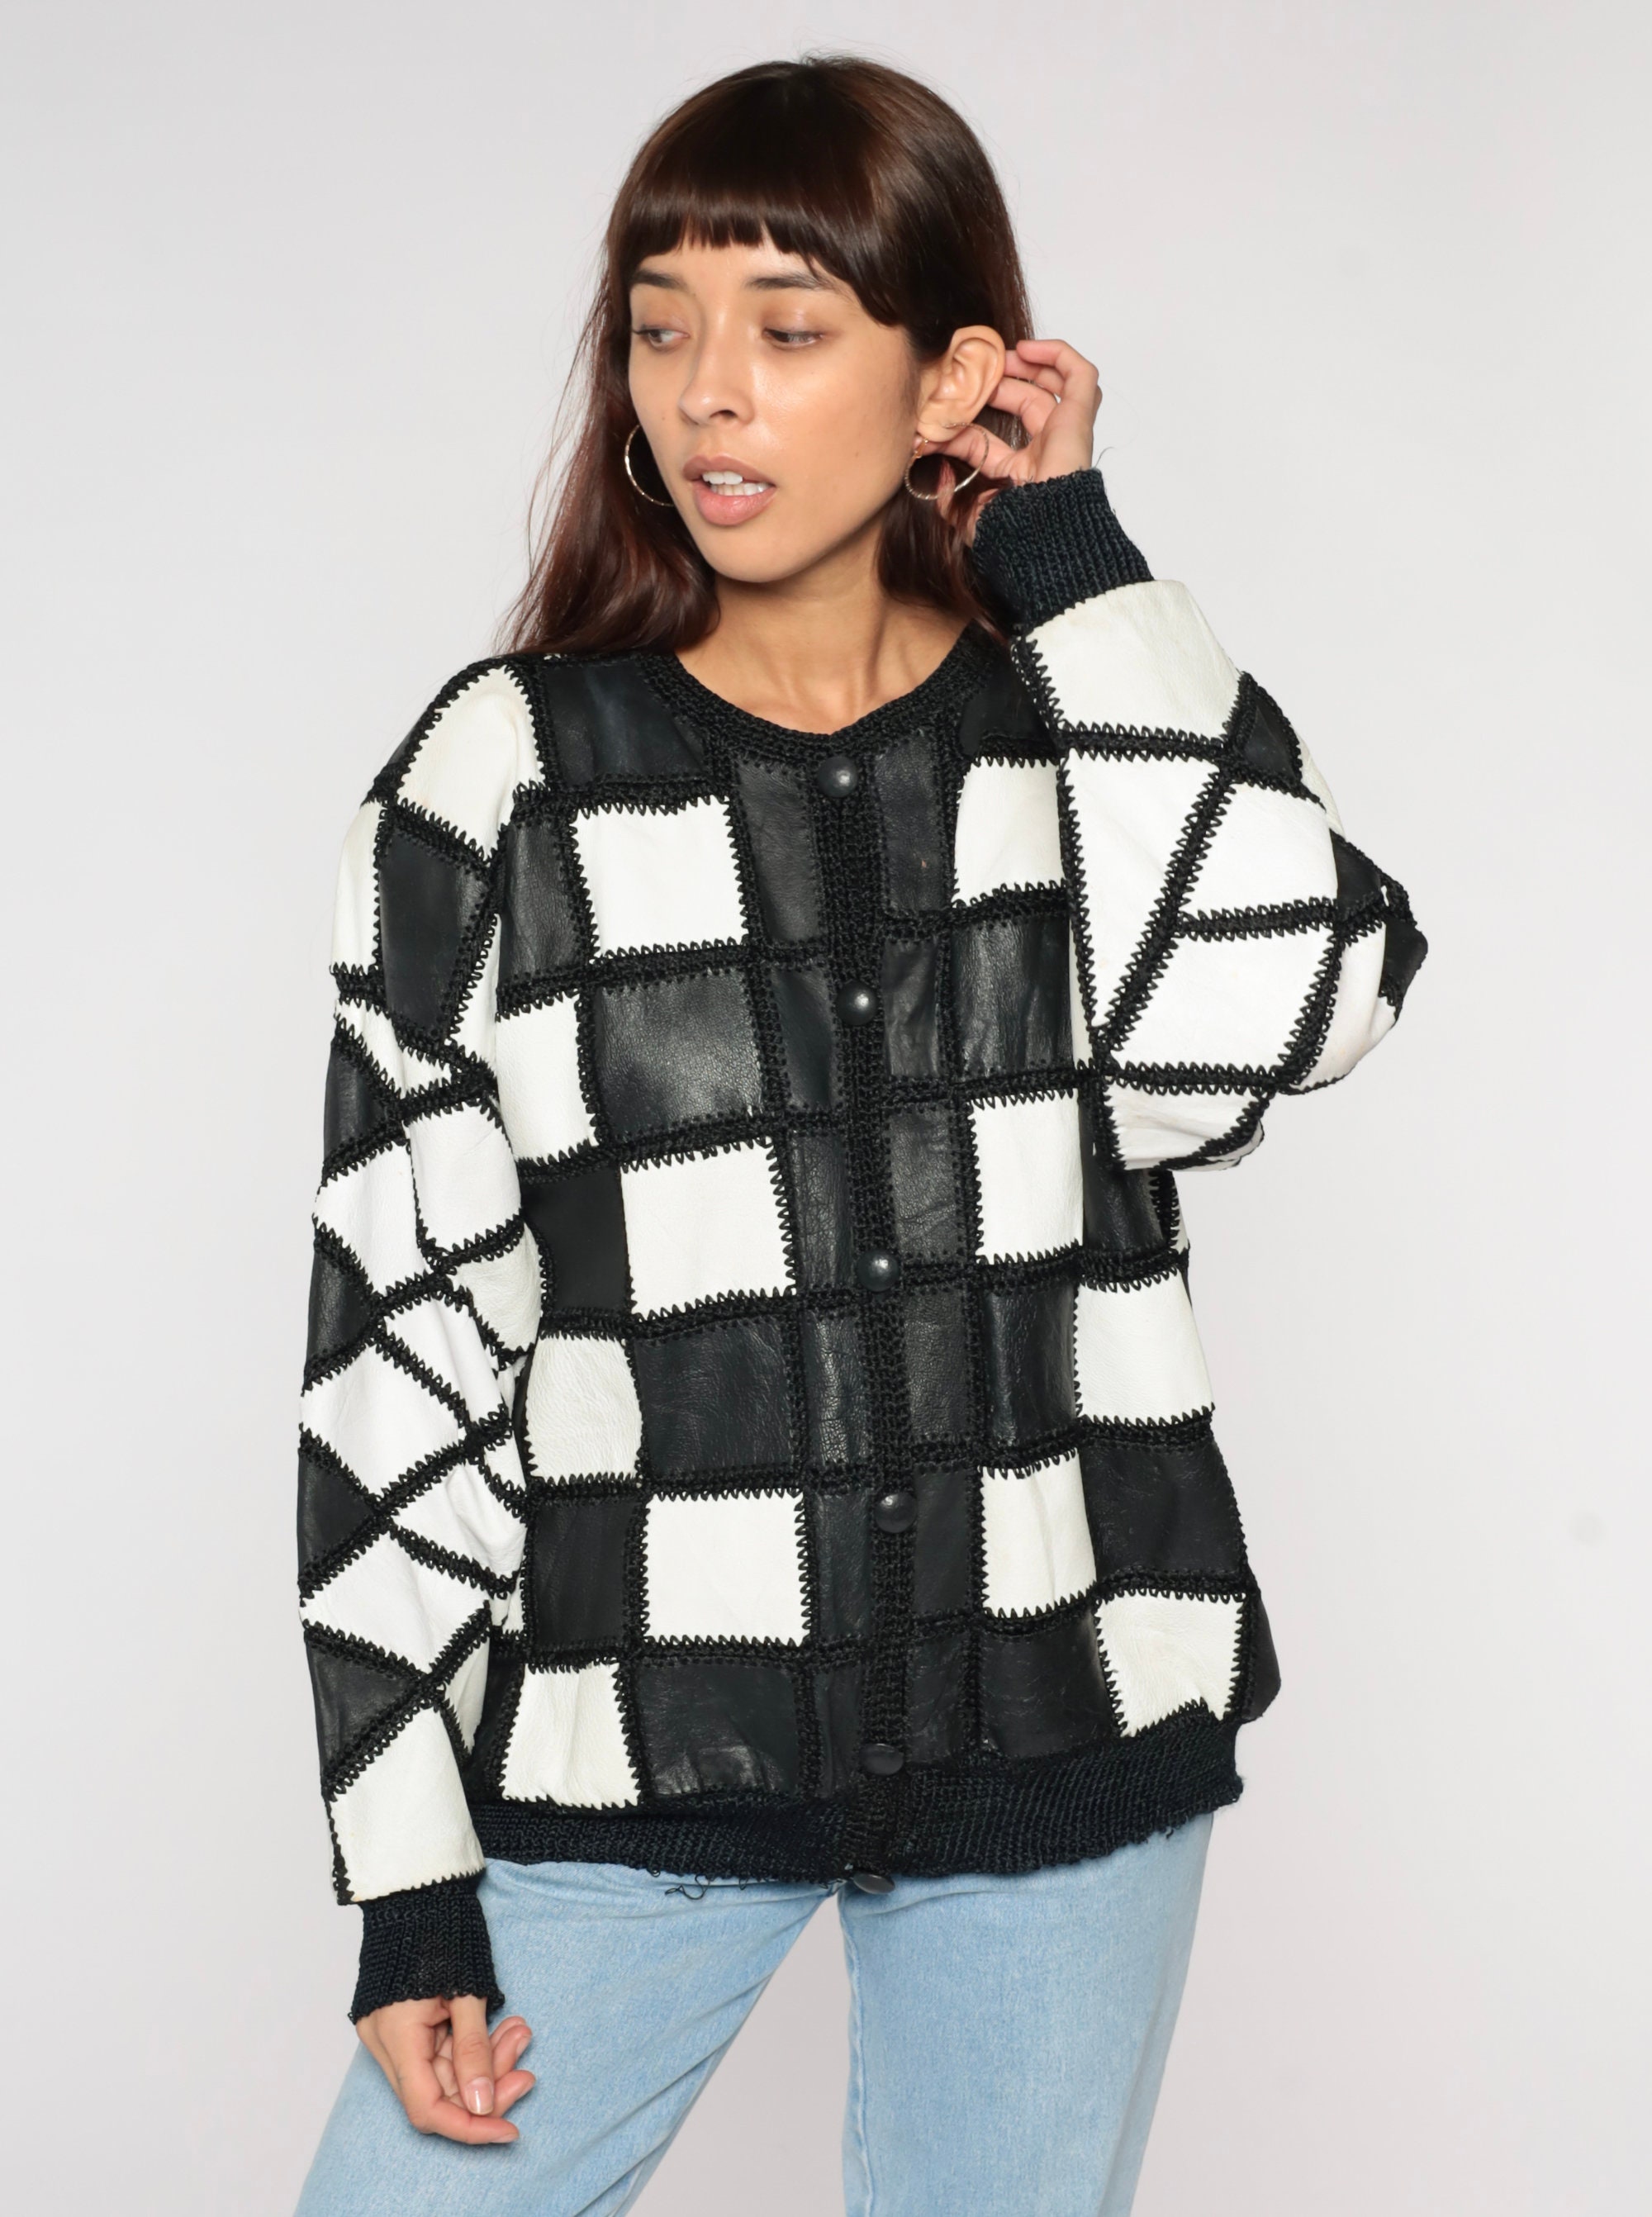 Patchwork Leather Jacket 90s Black White Checkered Button Up Sweater ...